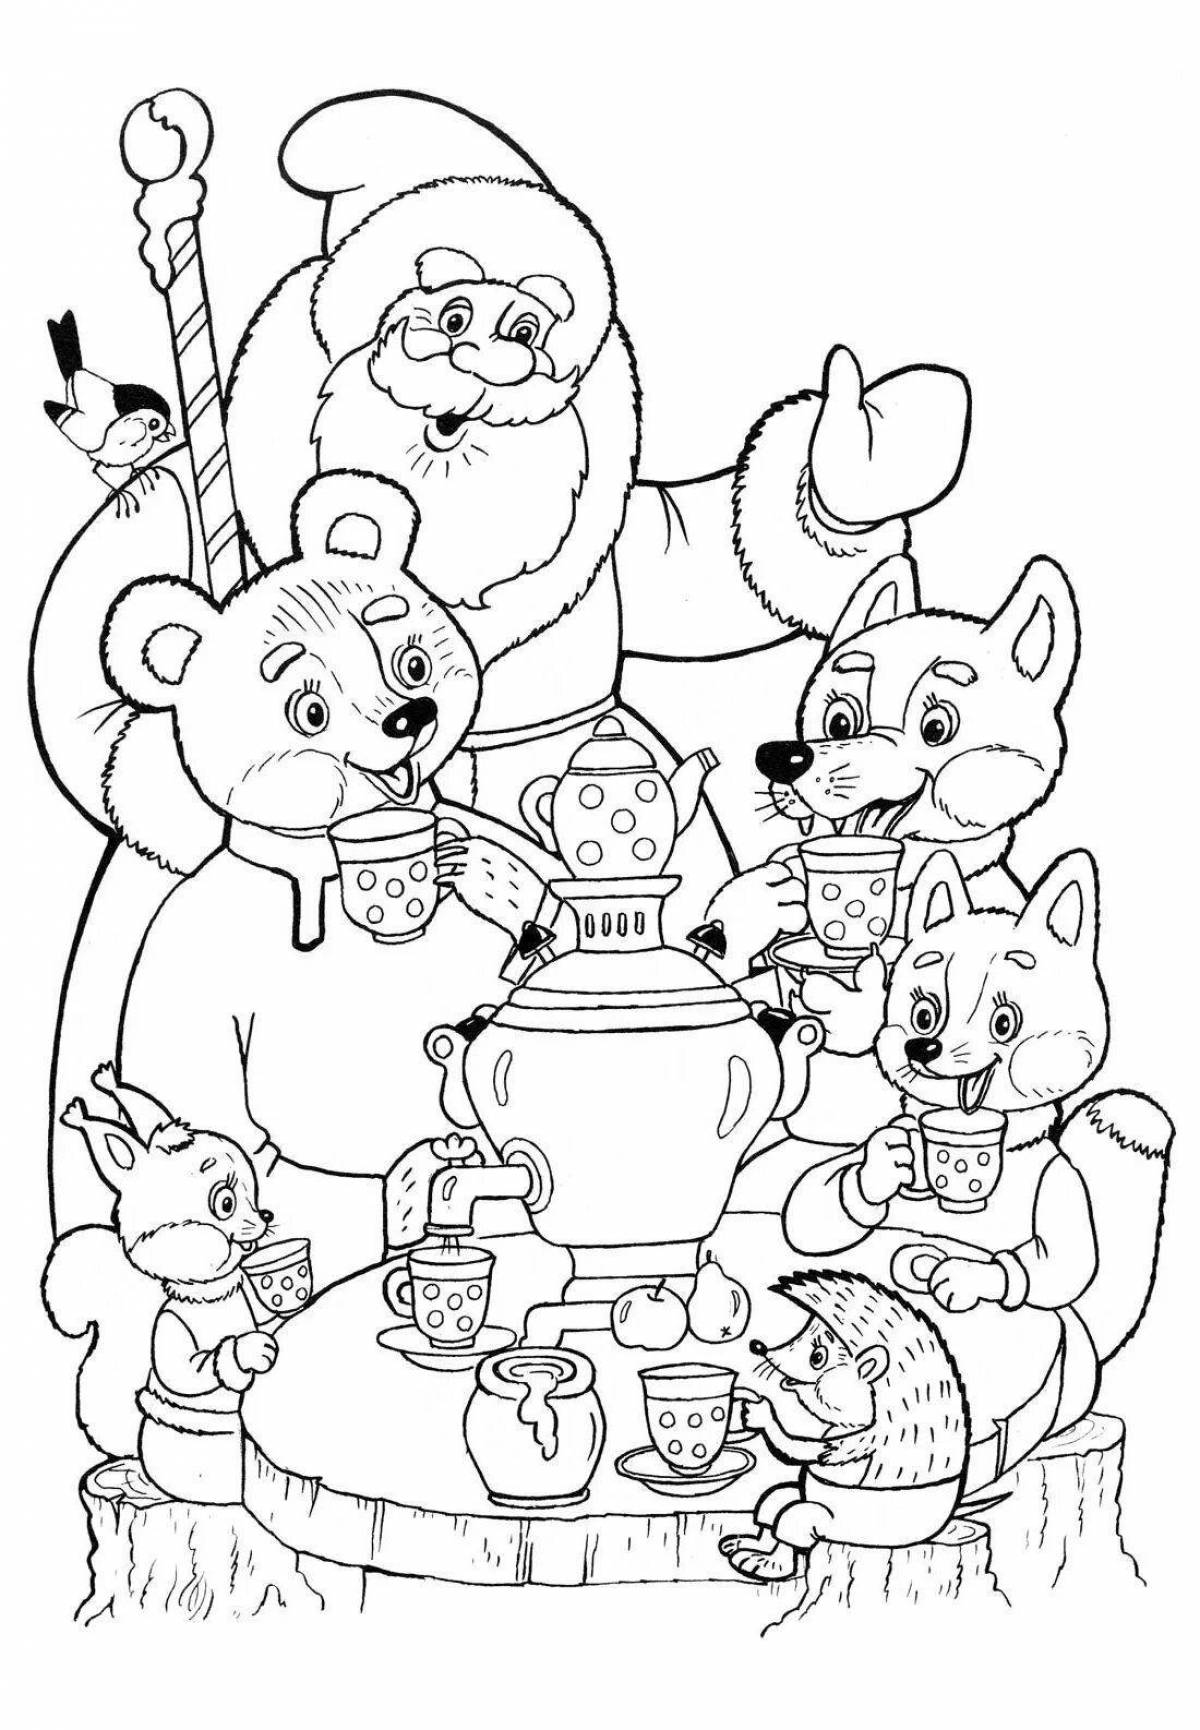 Gorgeous santa claus and animals coloring book